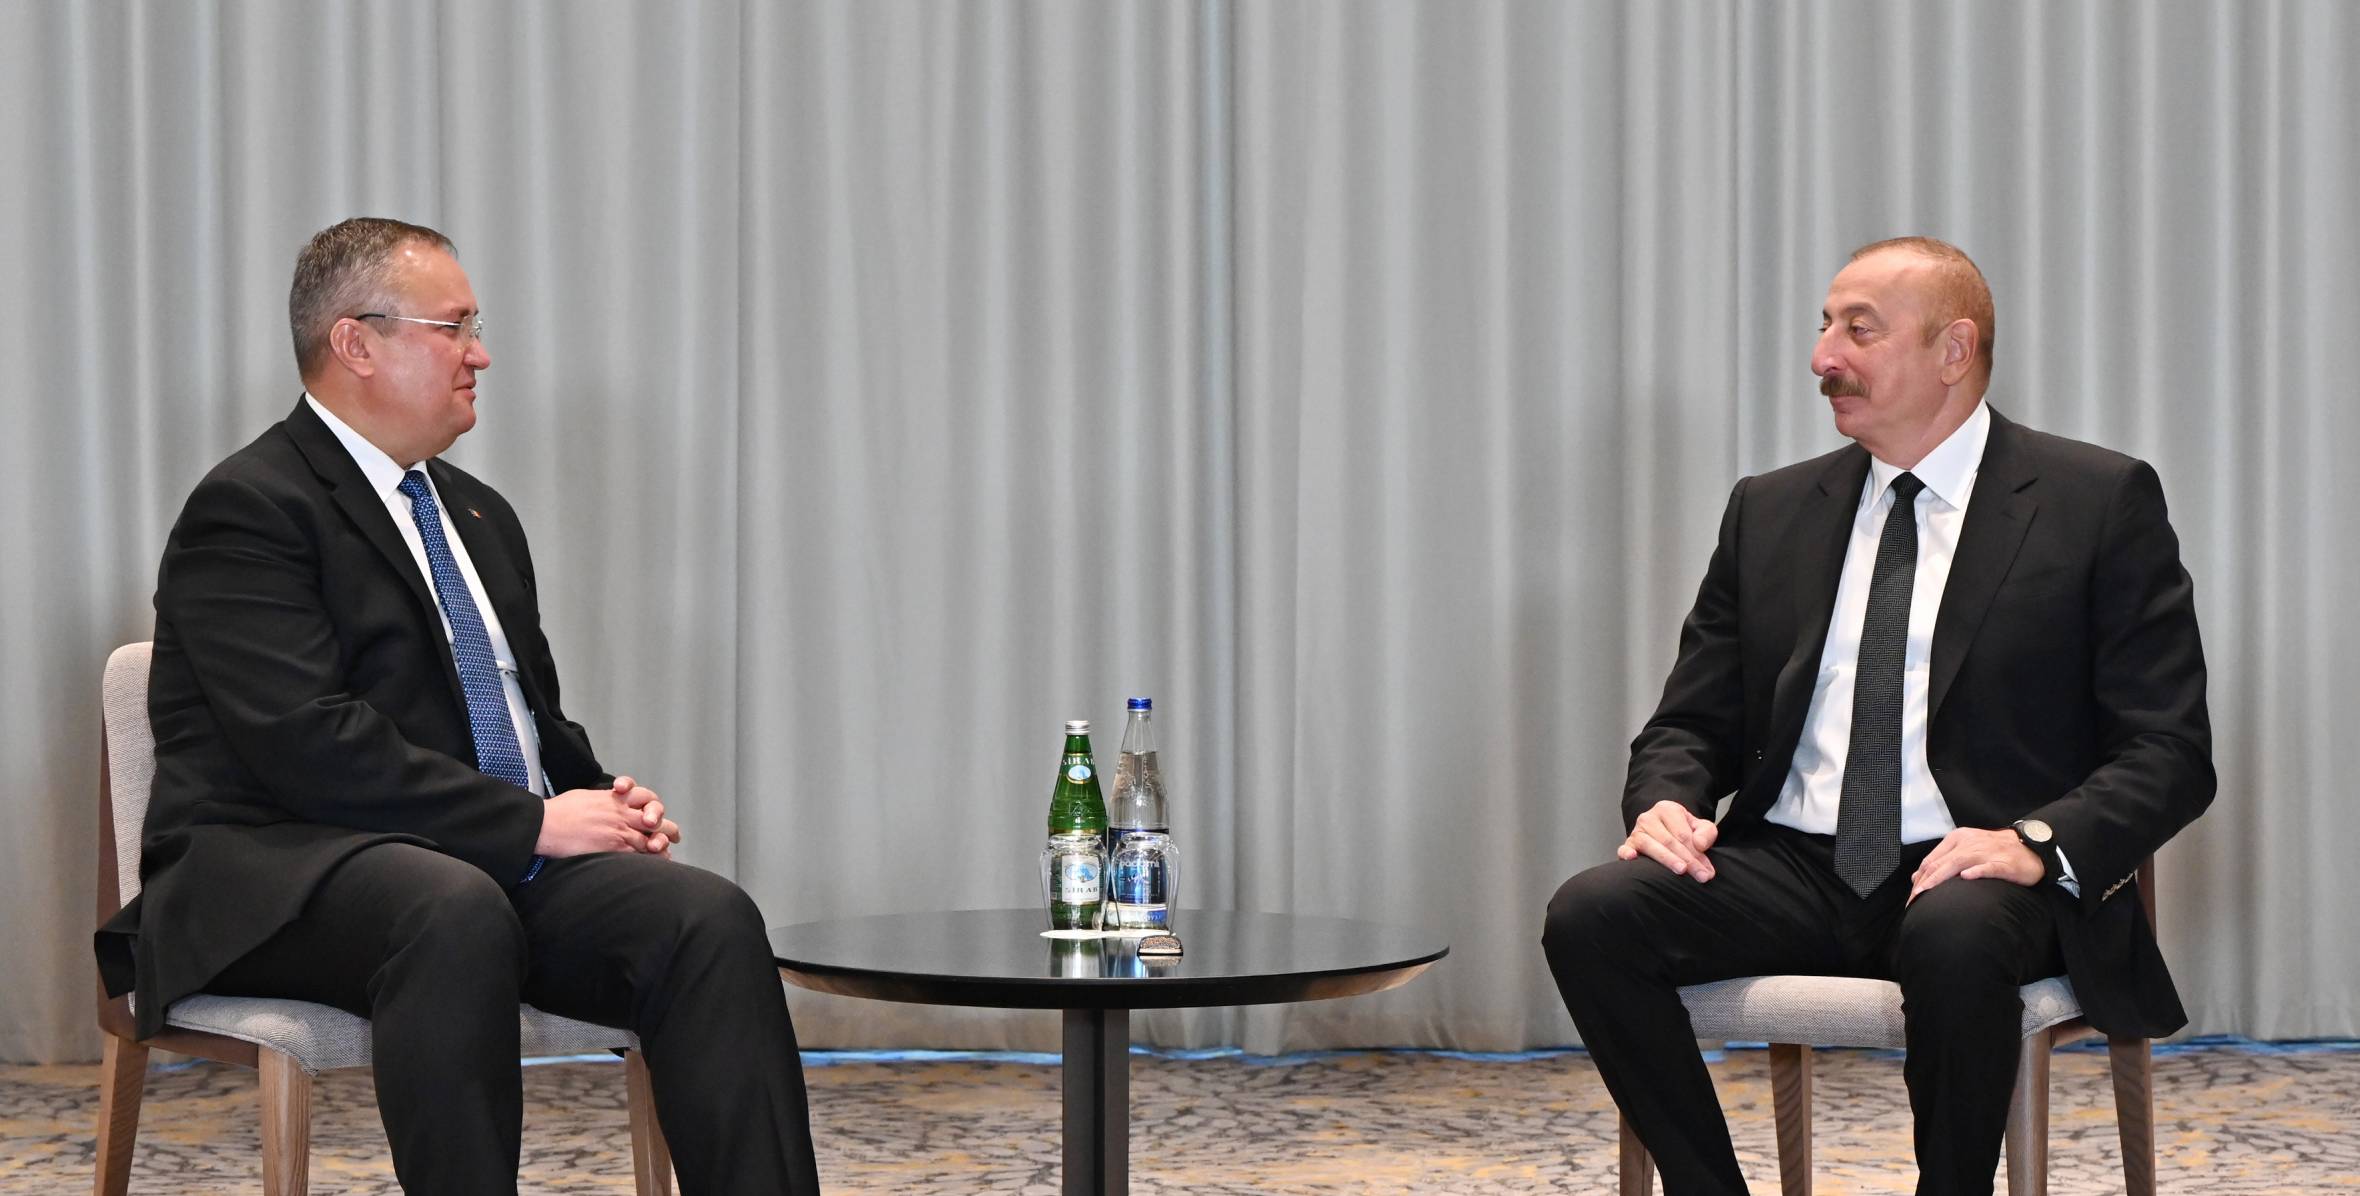 Ilham Aliyev met with Prime Minister of Romania in Sofia